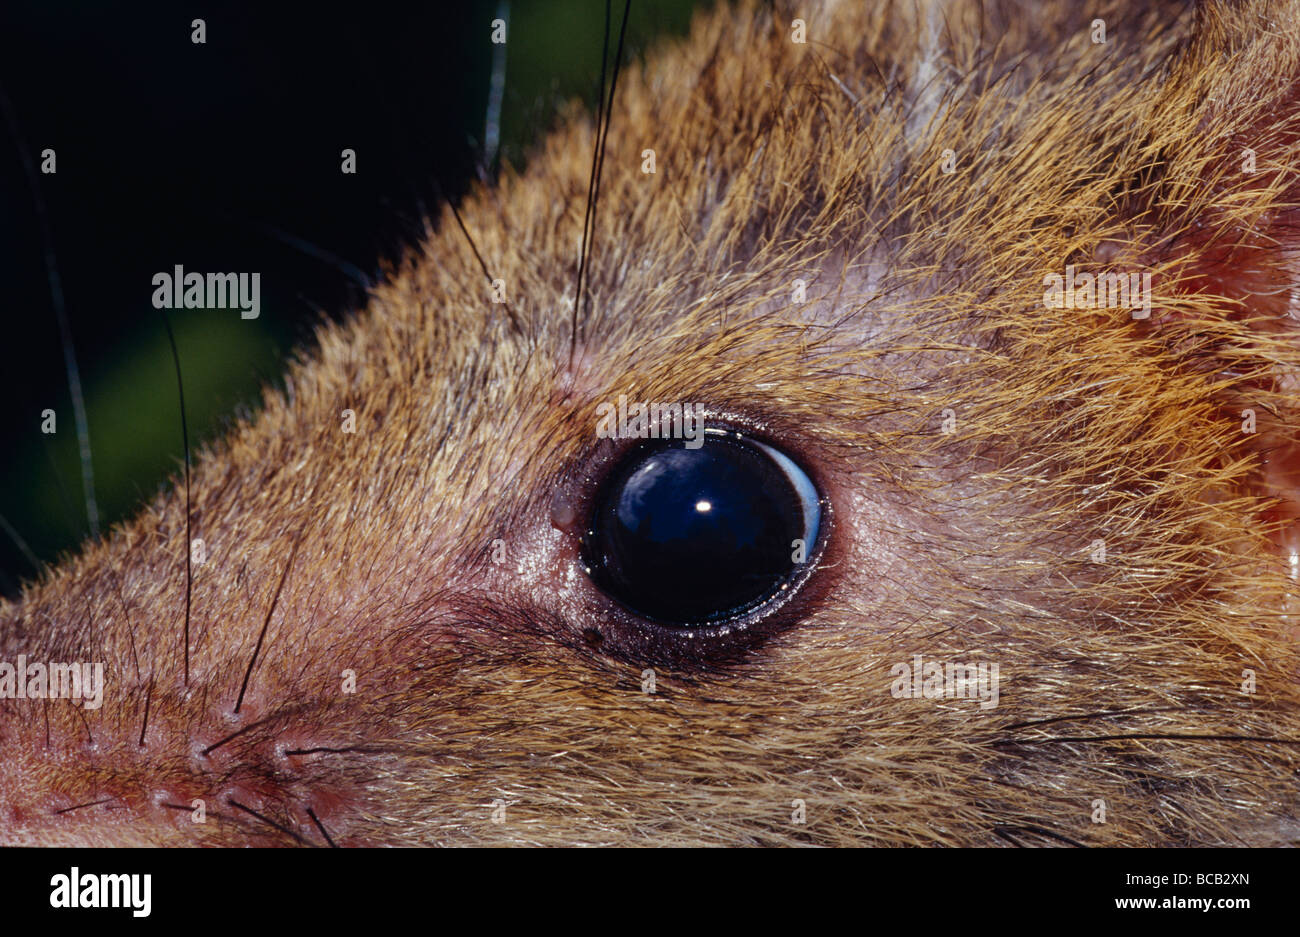 A closeup view of the eye and fur of an Eastern Spotted Quoll. Stock Photo